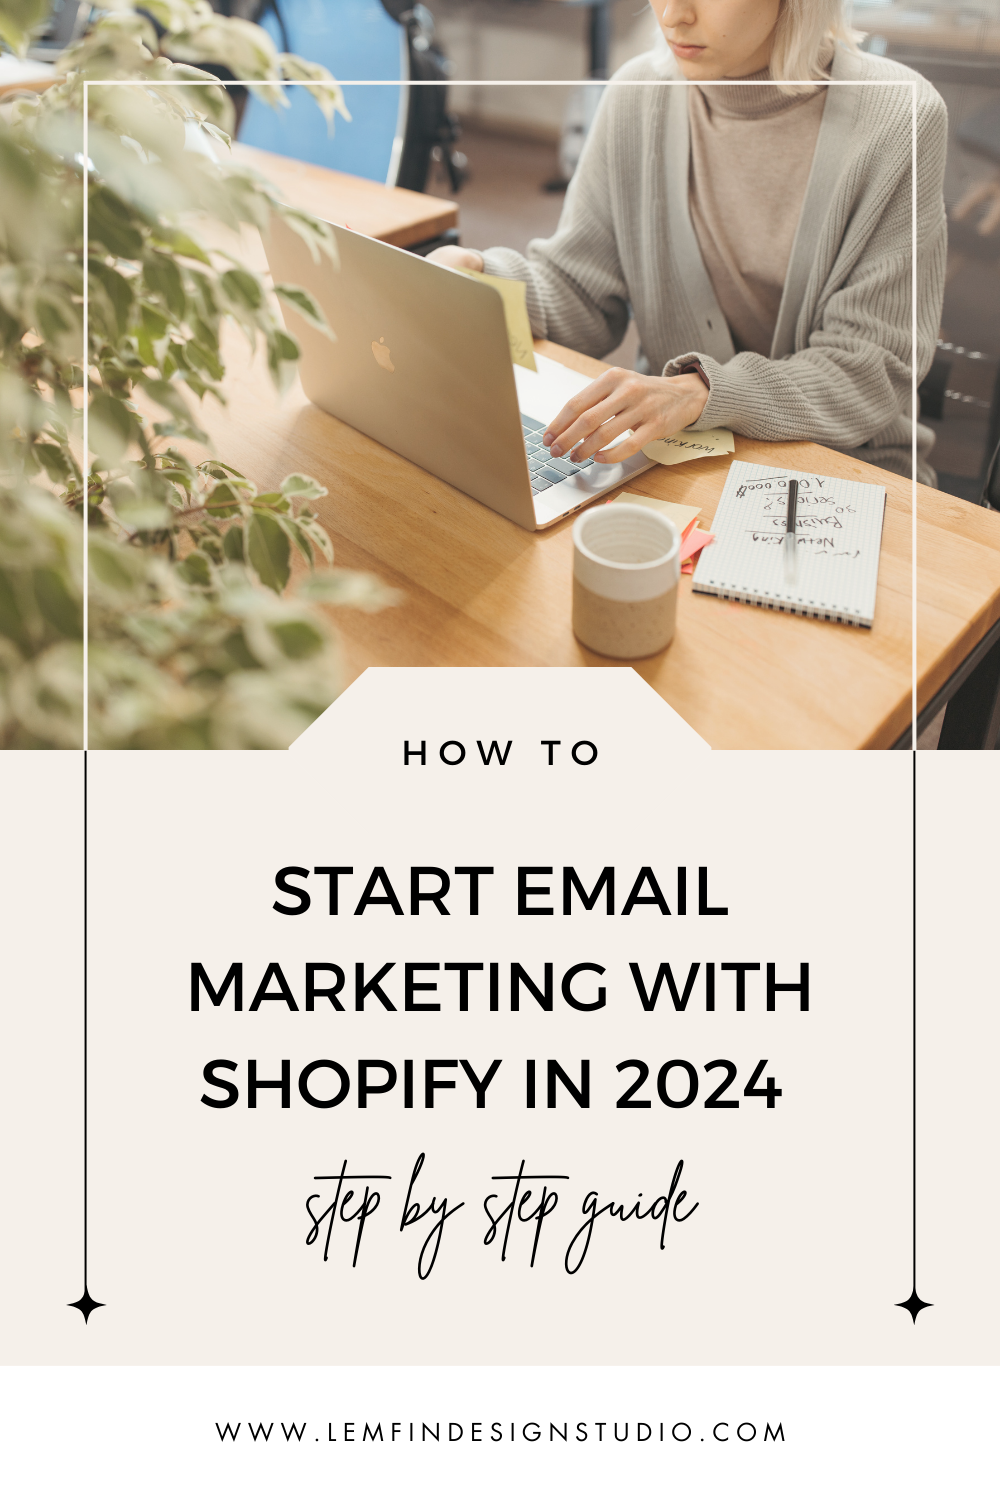 How to start email marketing with shopify in 2024 for artist and designers